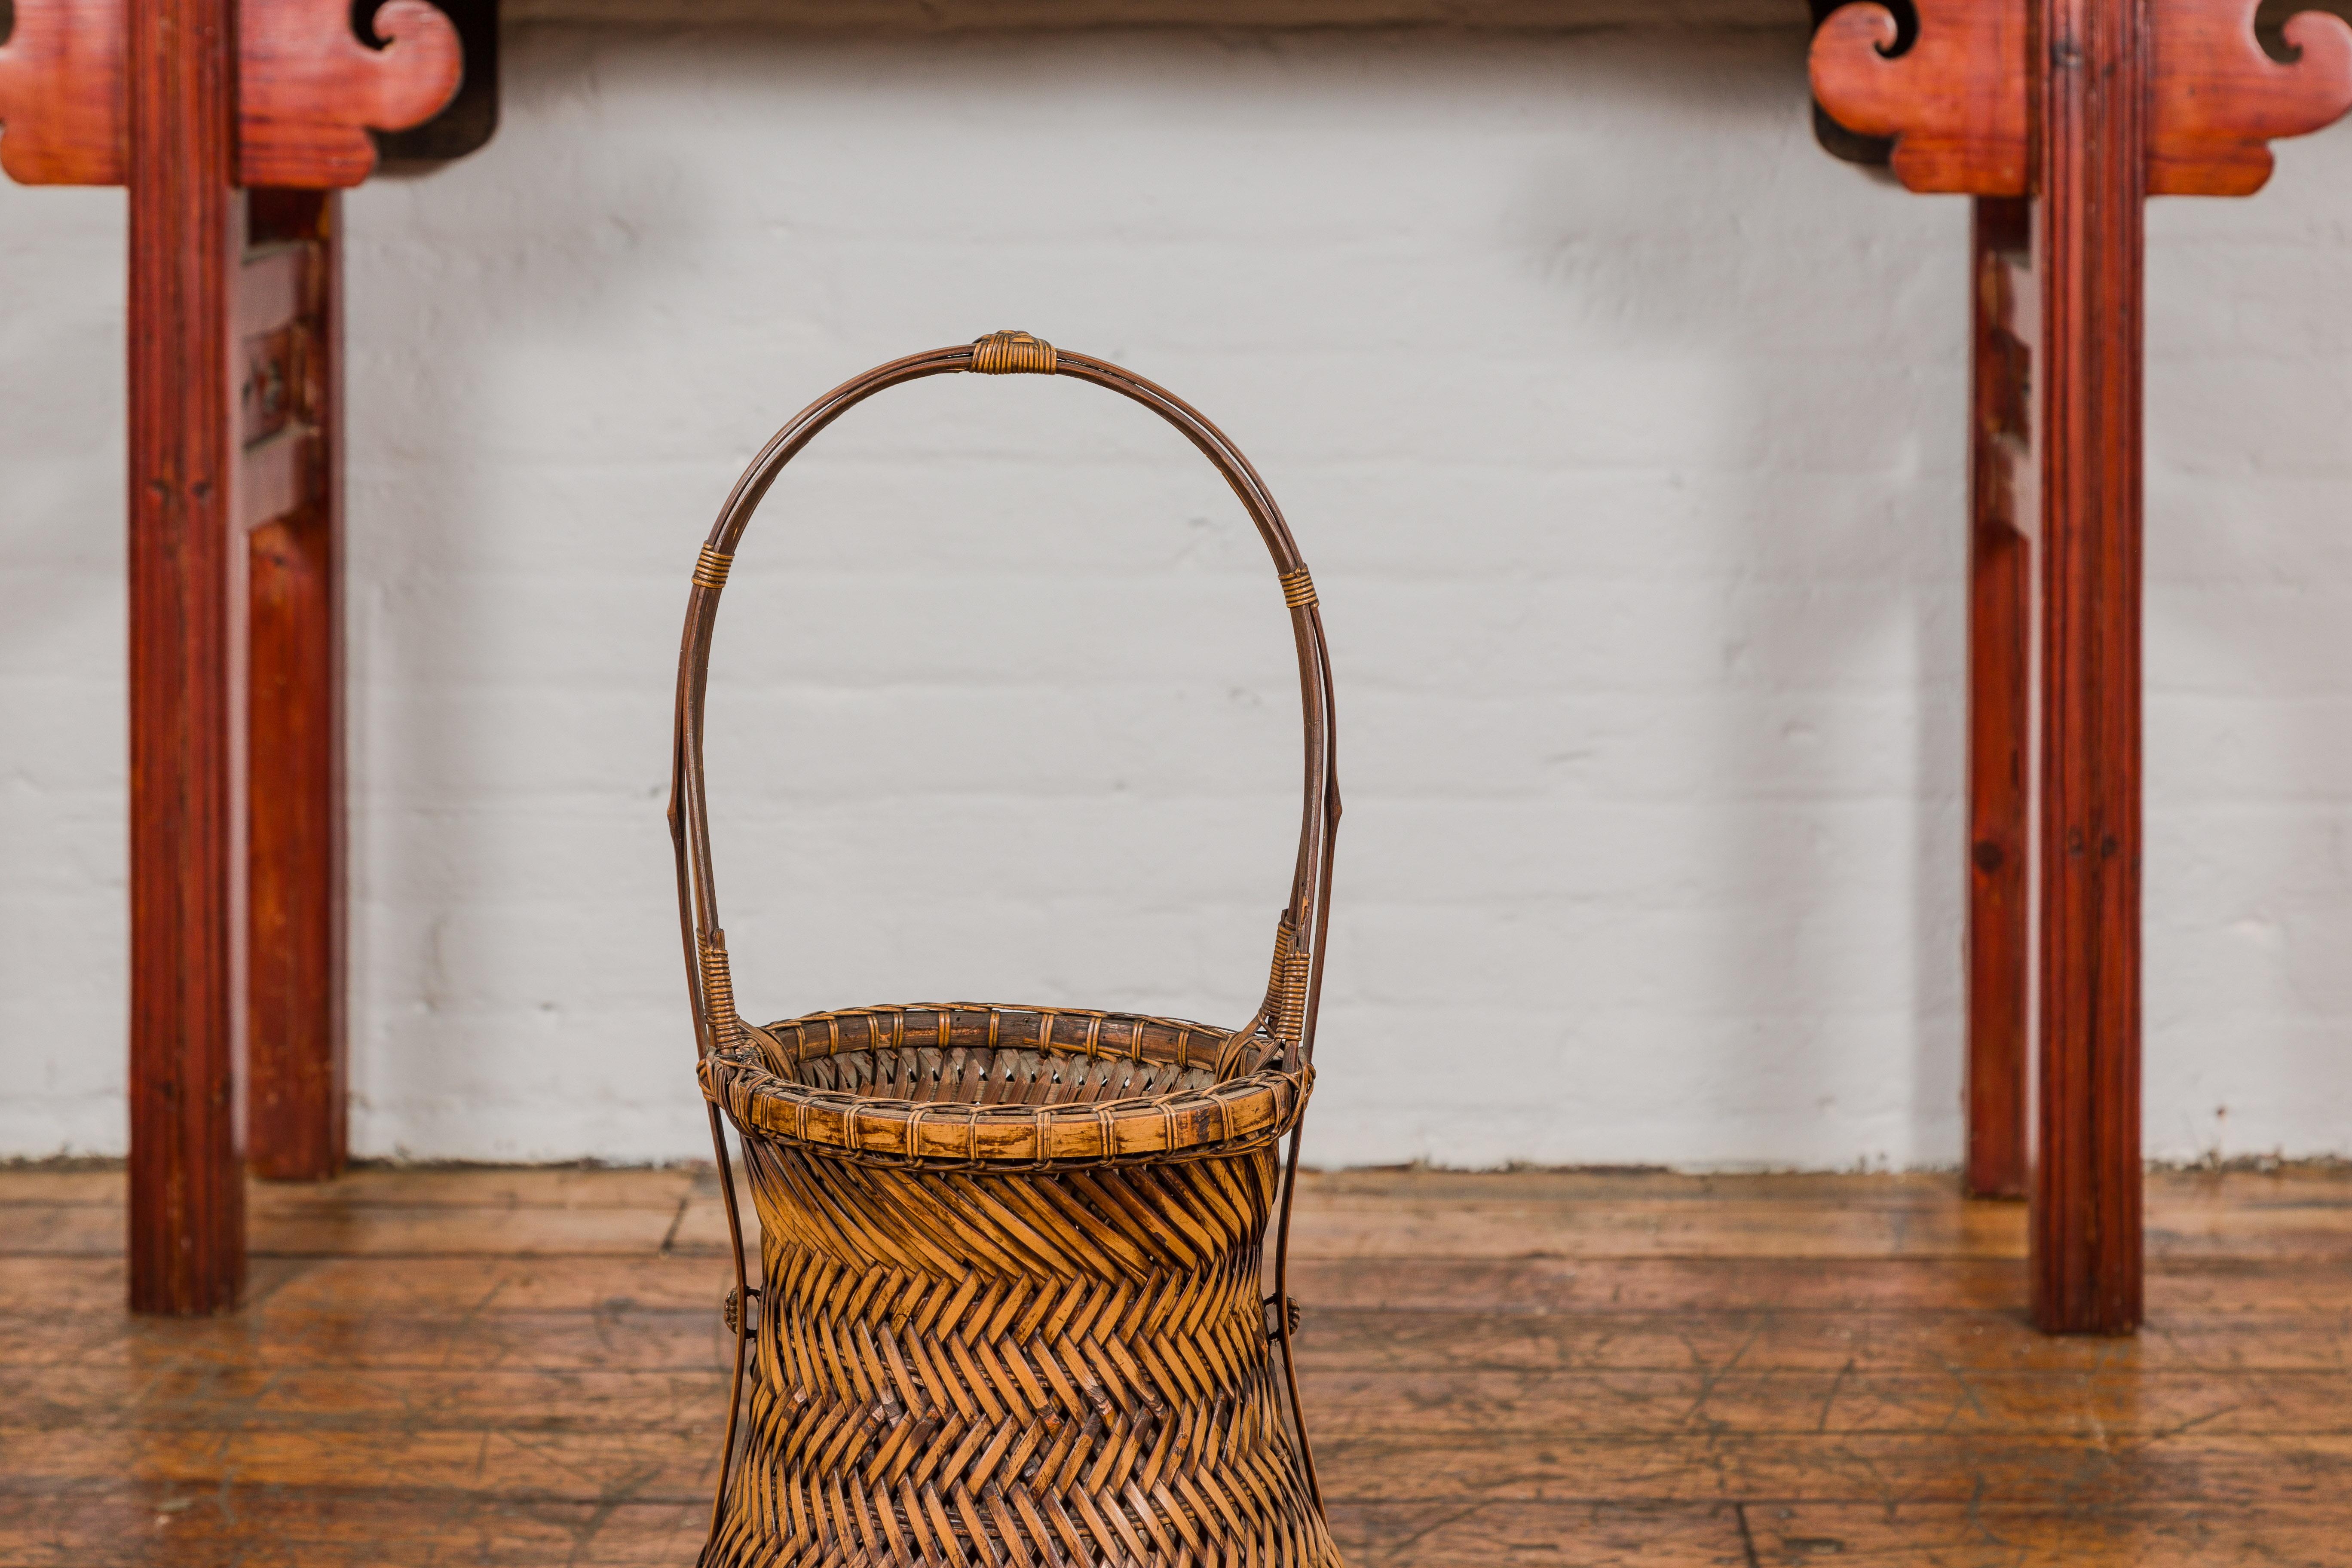 Antique Japanese Woven Bamboo Ikebana Basket with Large Handle, circa 1900 For Sale 1